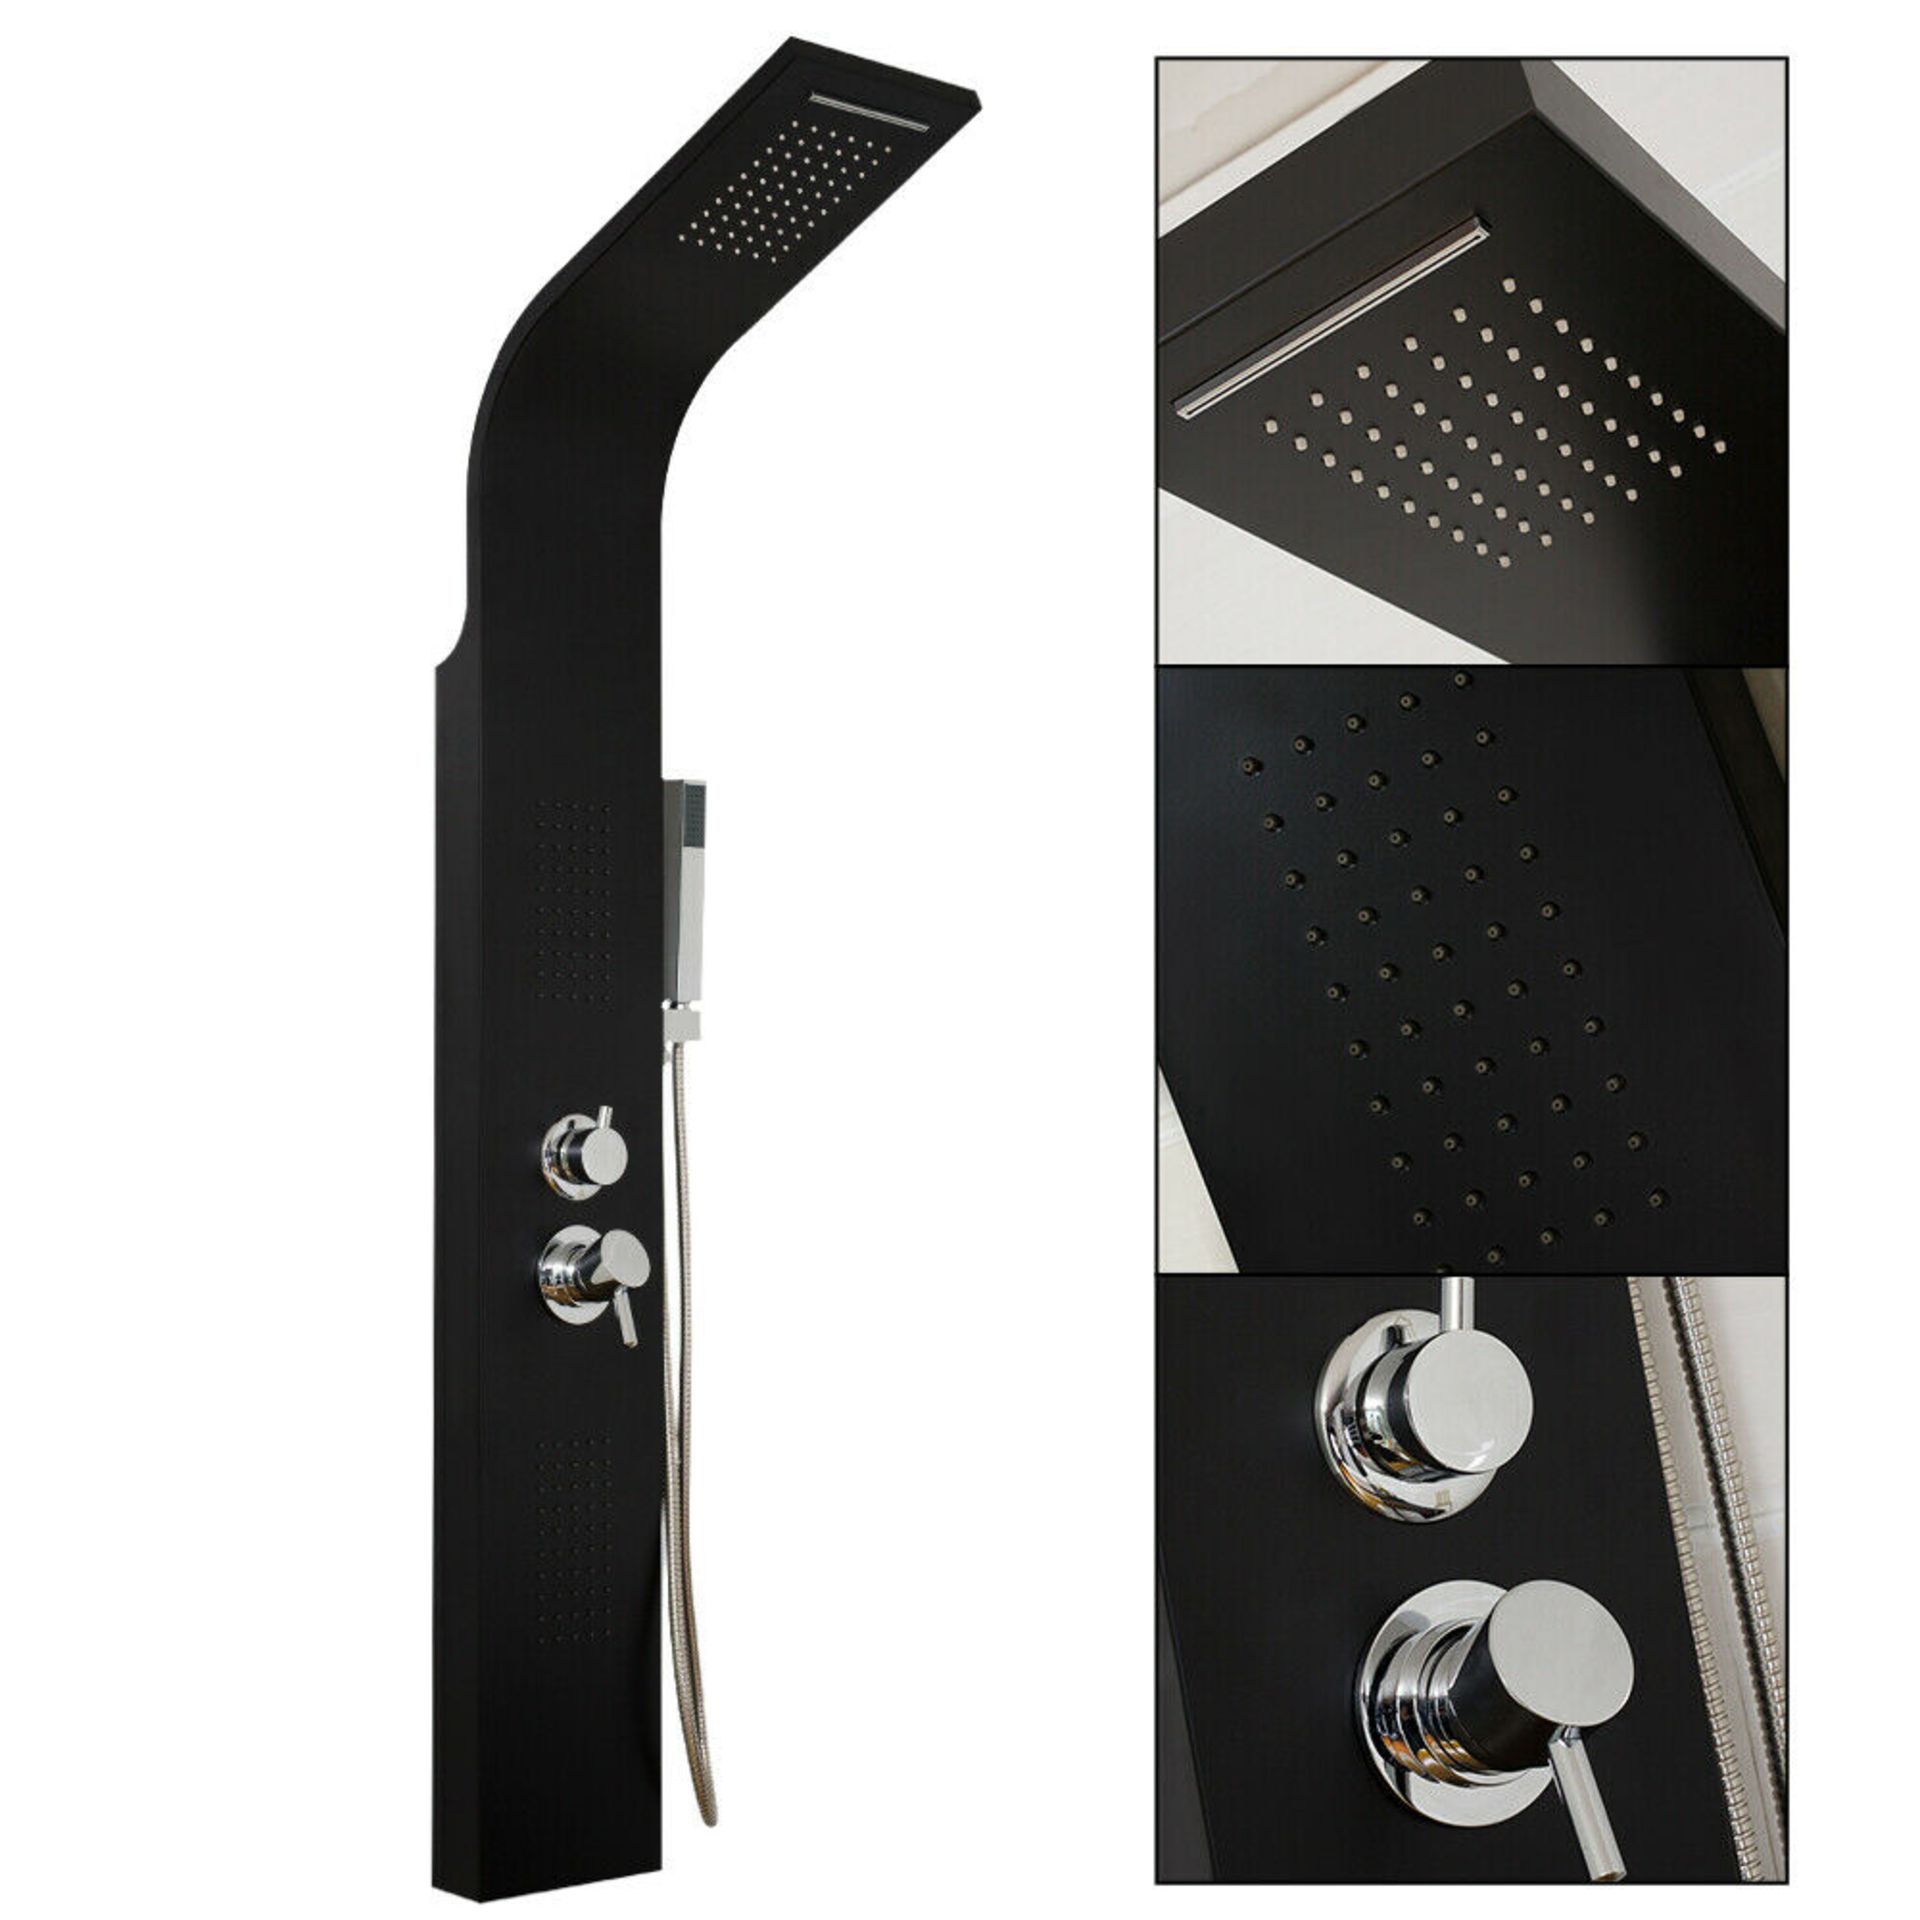 (XL3) Black Shower Tower Panel System Twin Heads With Luxury body jets. RRP £699.99. Built-i... - Image 3 of 4